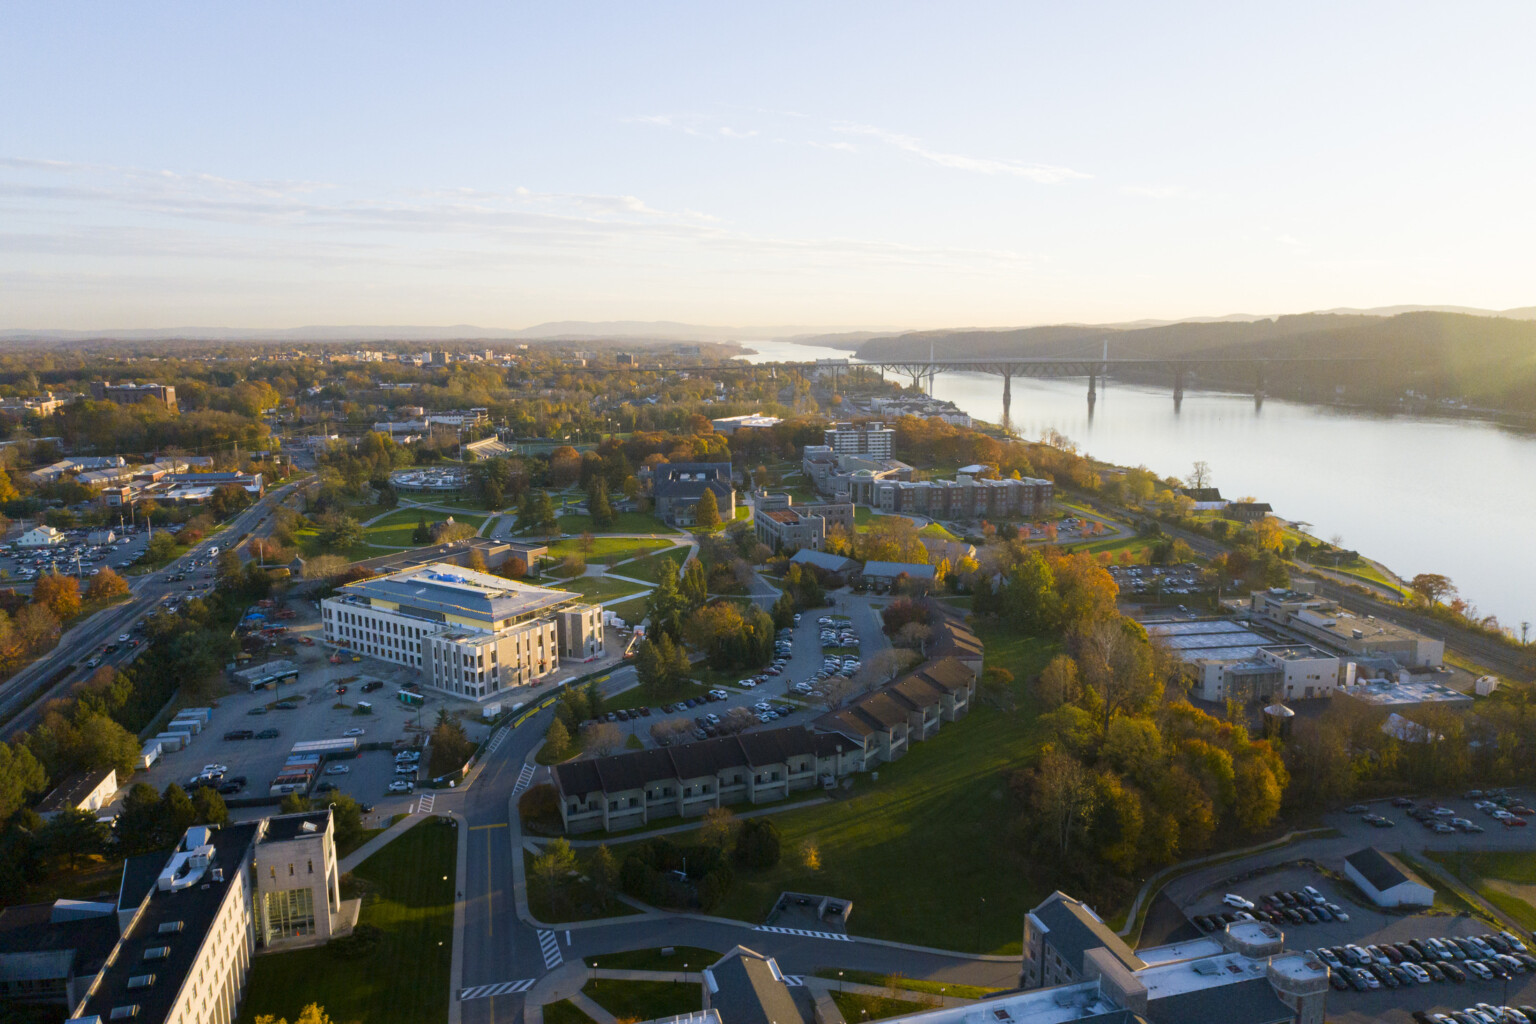 Aerial view of Marist College showing buildings settled in fall colored foliage in front of a river.